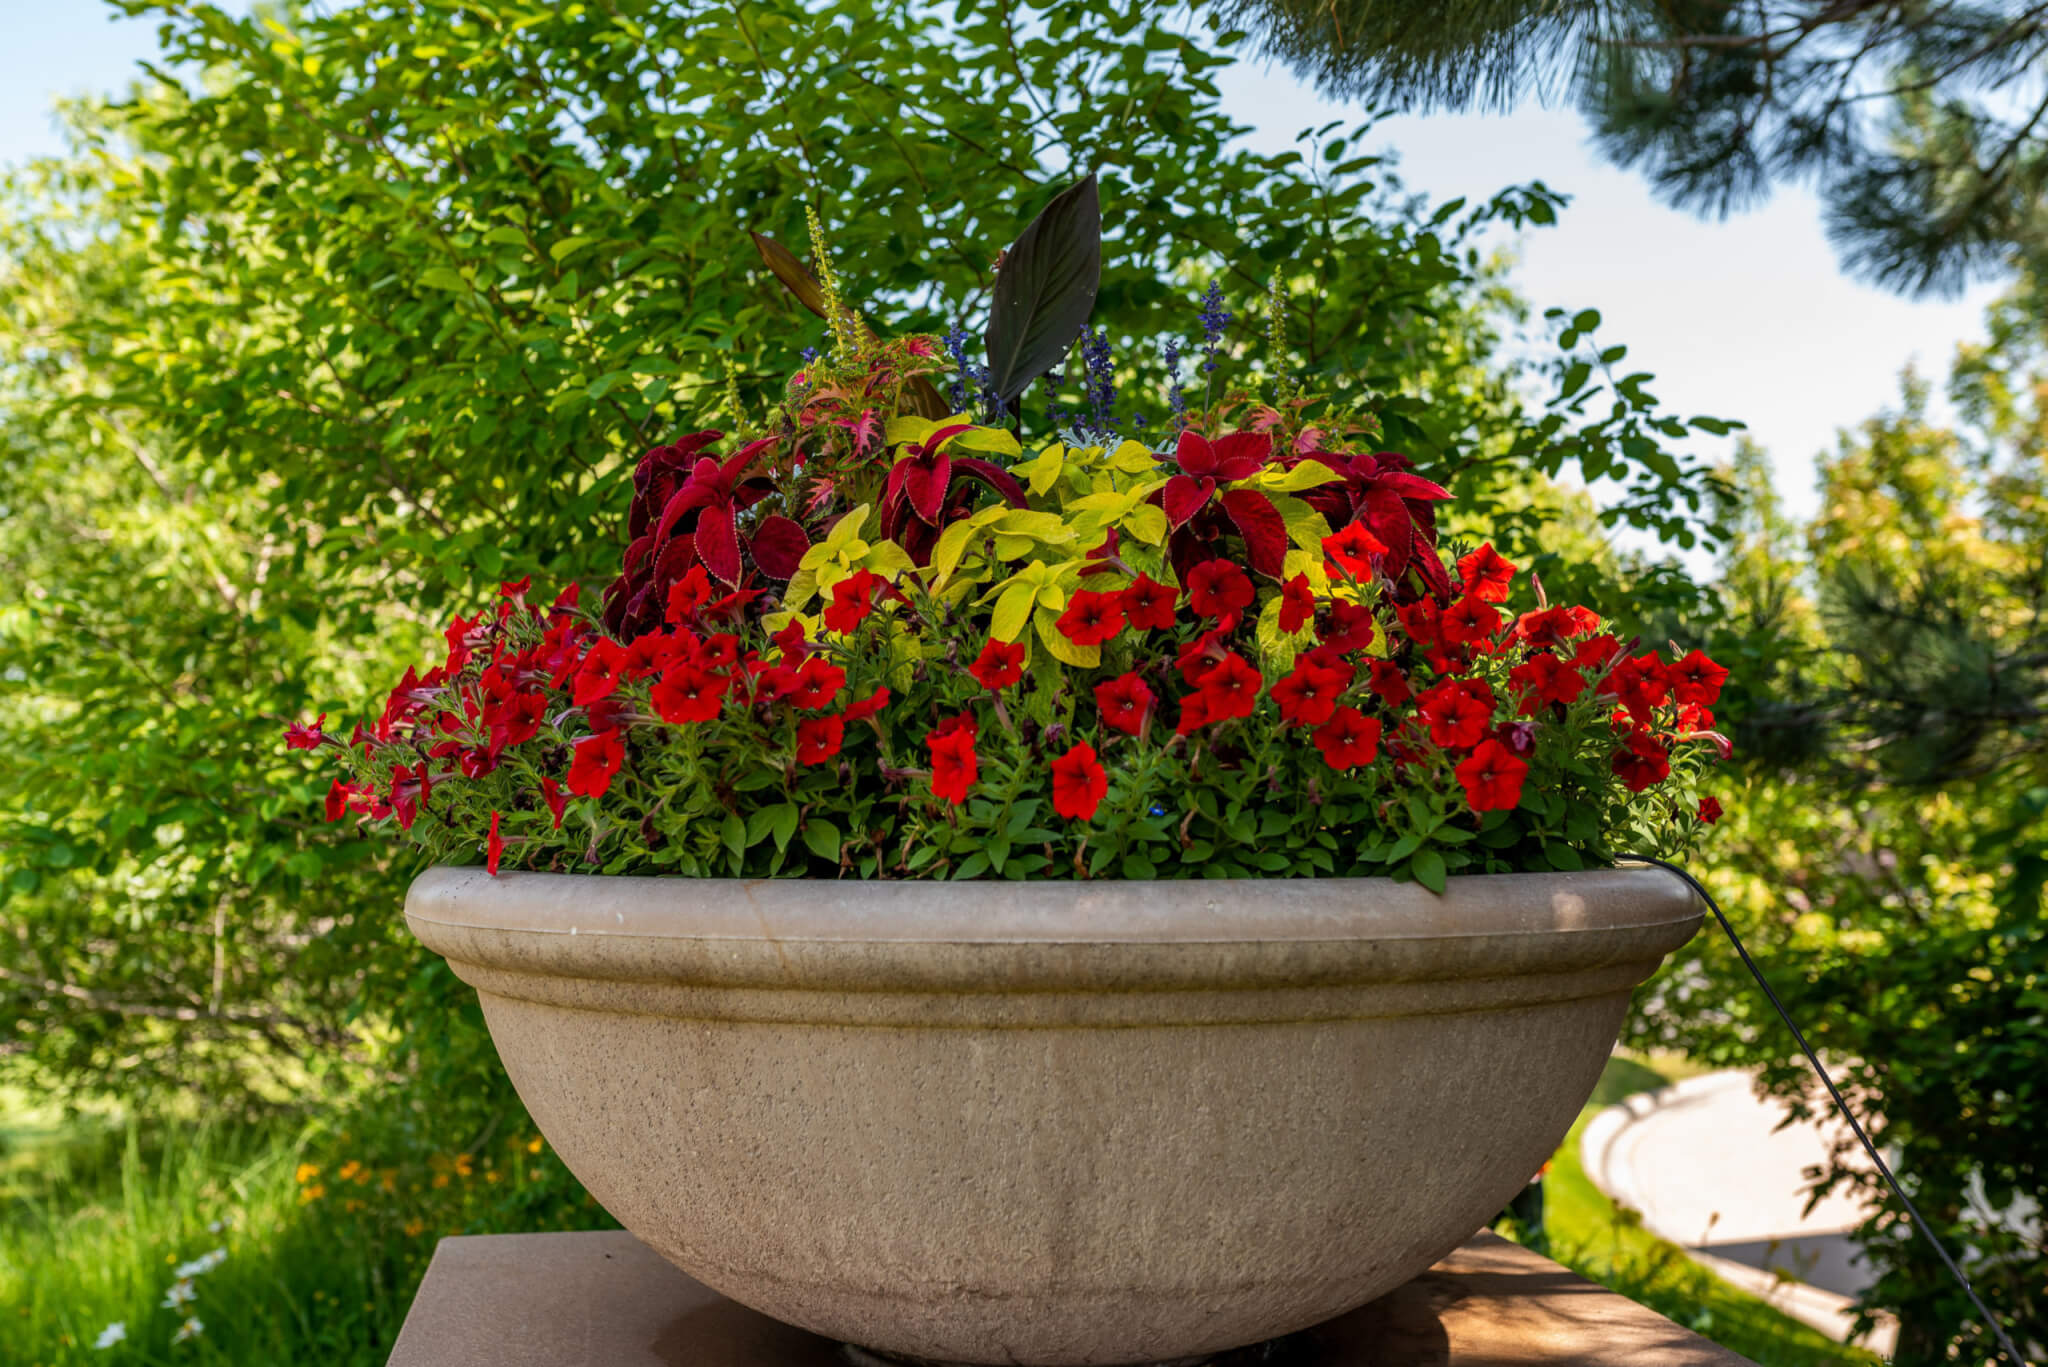 A big flower pot filled with colourful flower plants in the garden